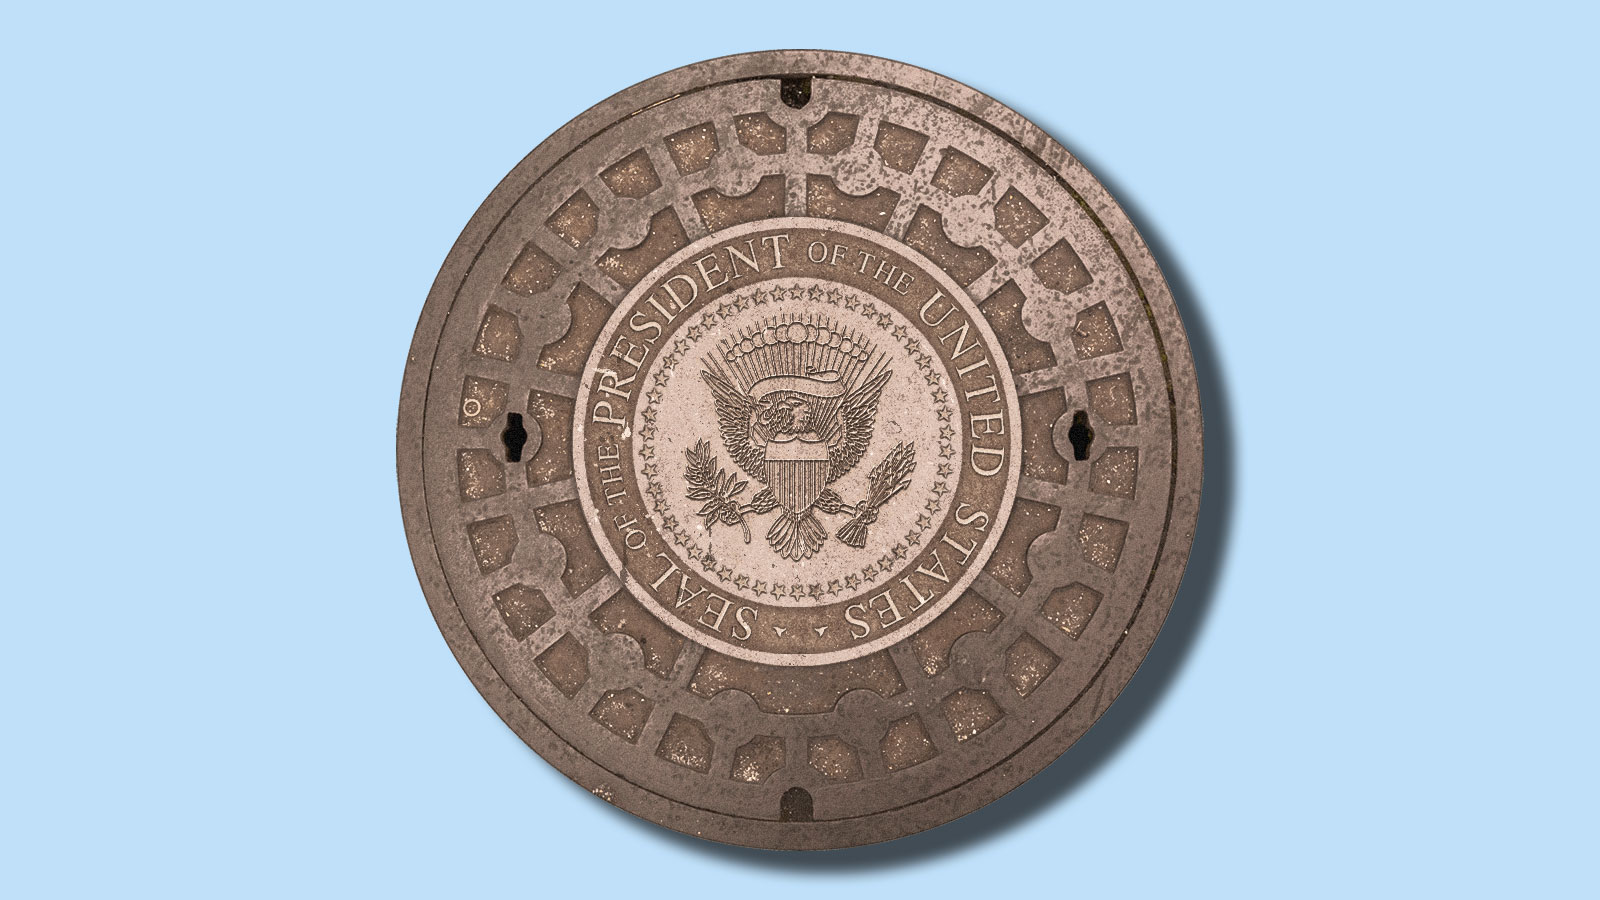 A manhole cover with the seal of the President of the United States embossed on it